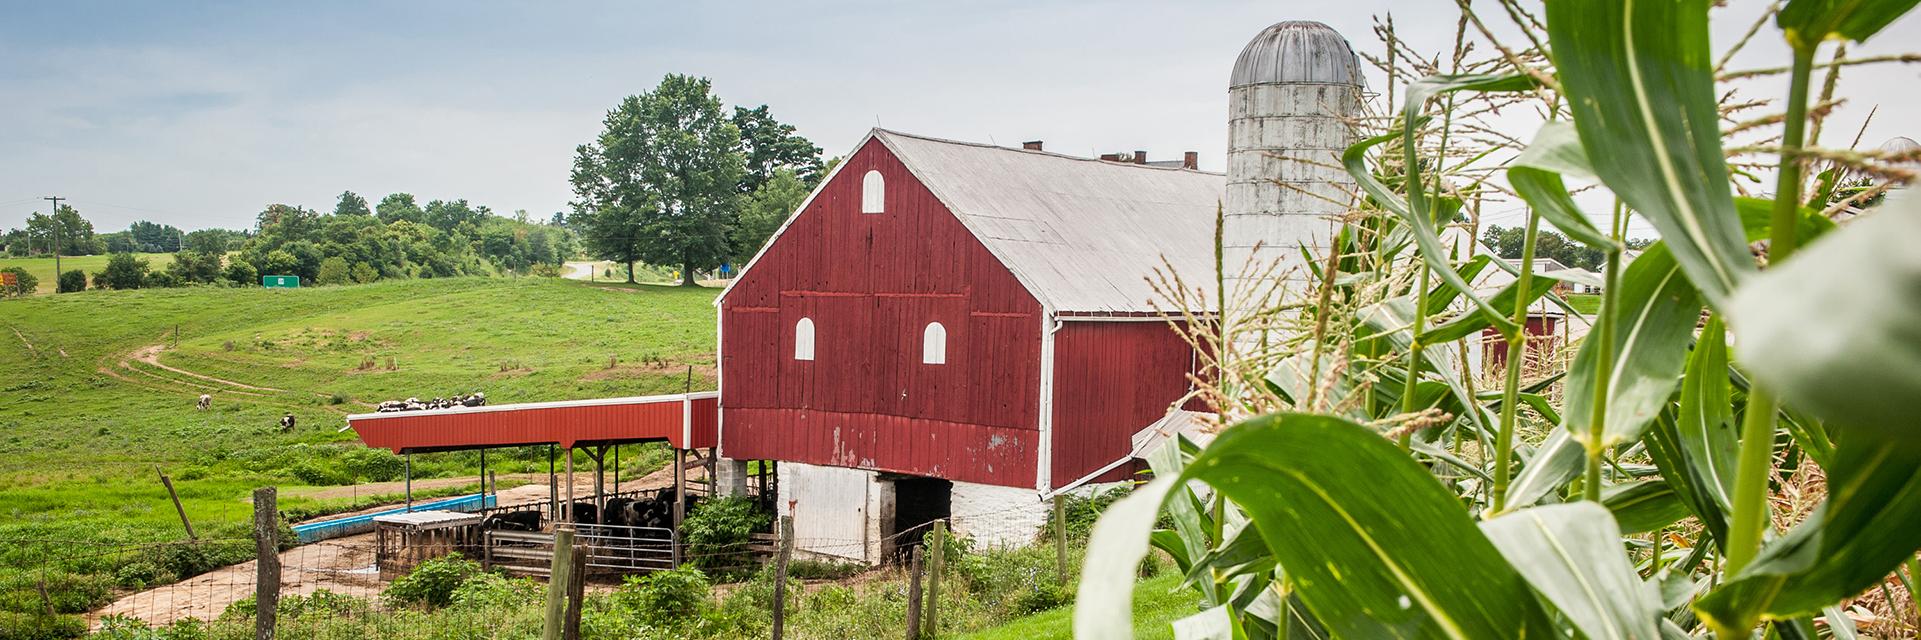 Corn in foreground, red barn in the middle, and cows on green pasture in the background